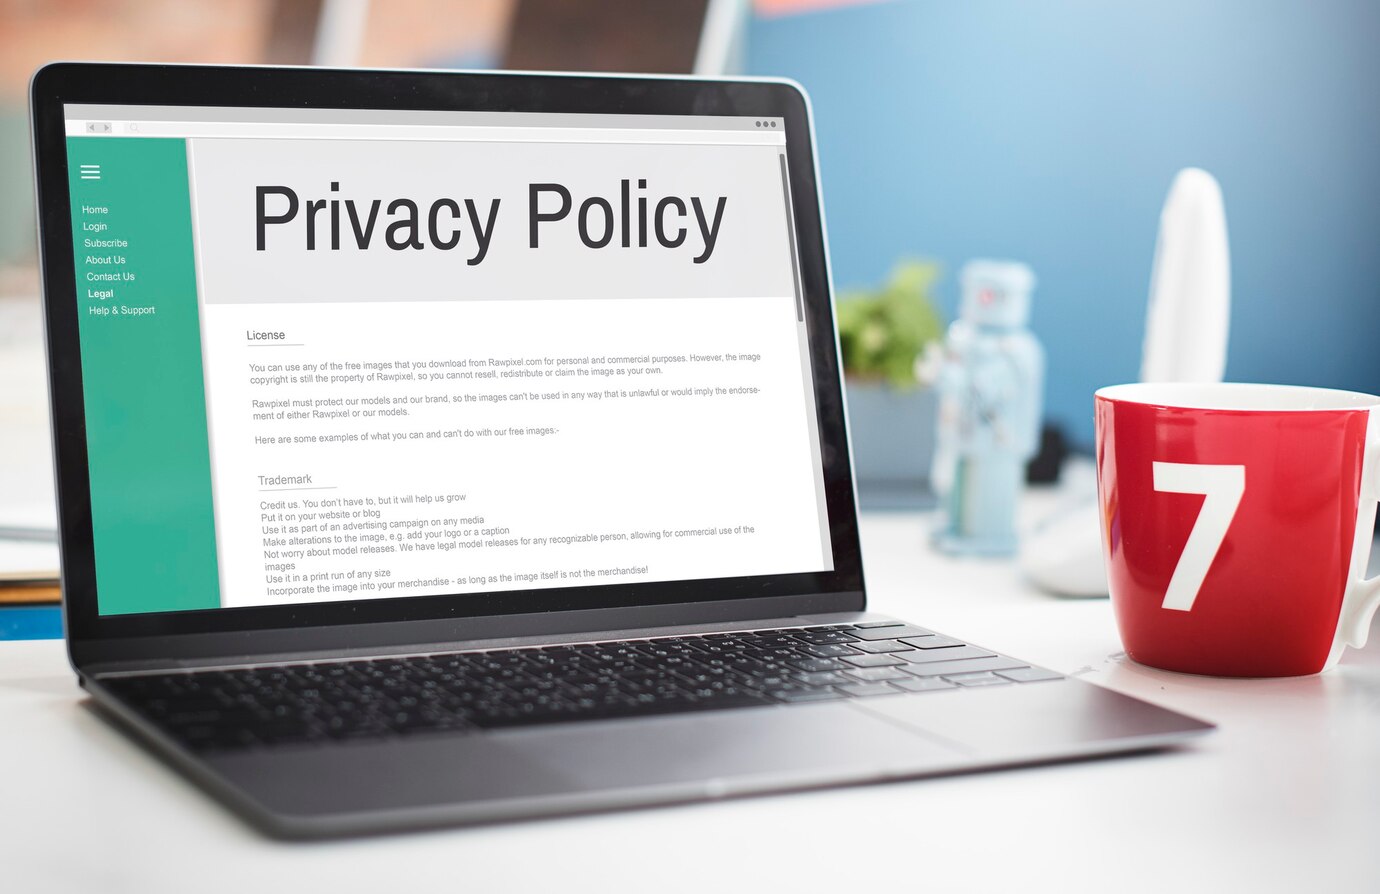 A picture of Laptop displaying Privacy Policy